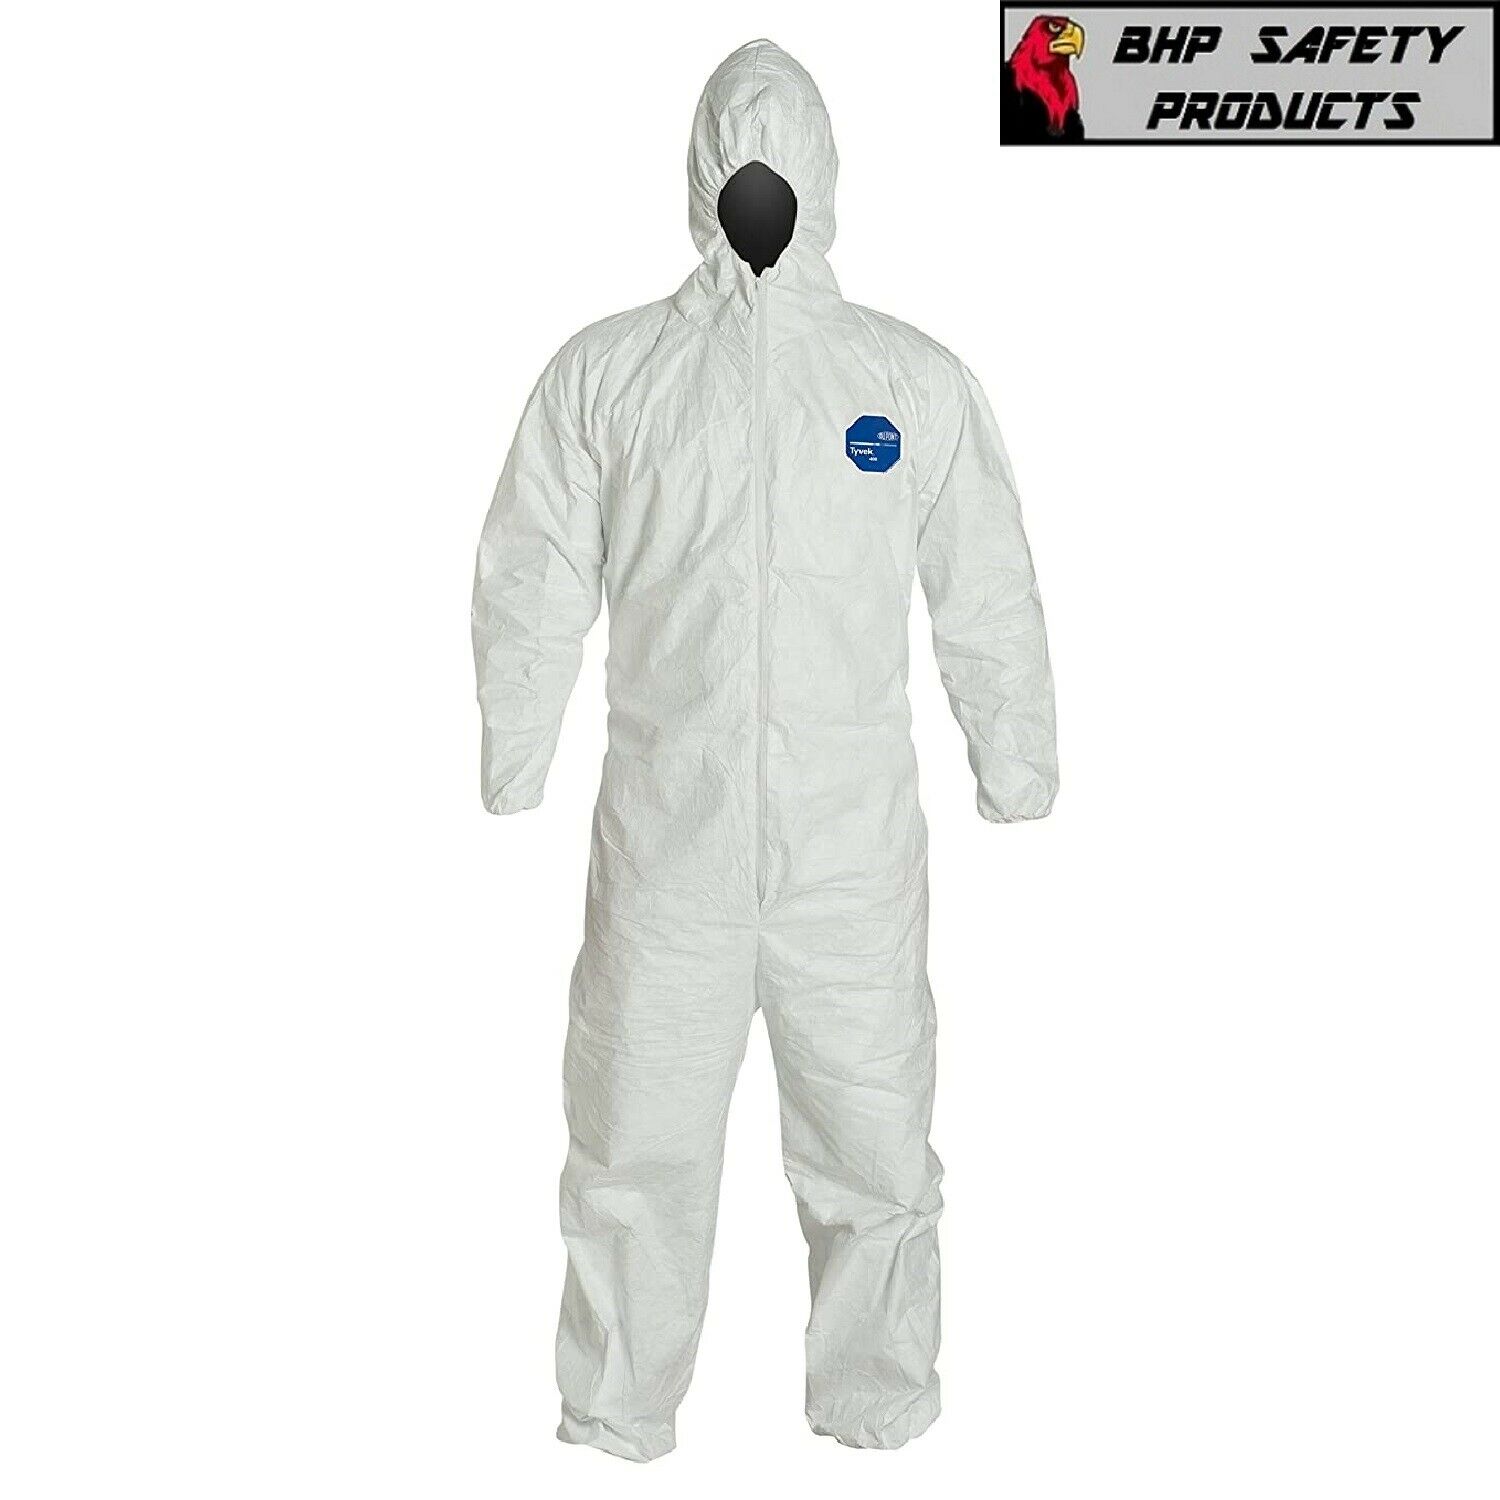 Dupont Ty127s White Tyvek Coverall Bunny Suit Hood W/ Elastic Wrist & Ankles